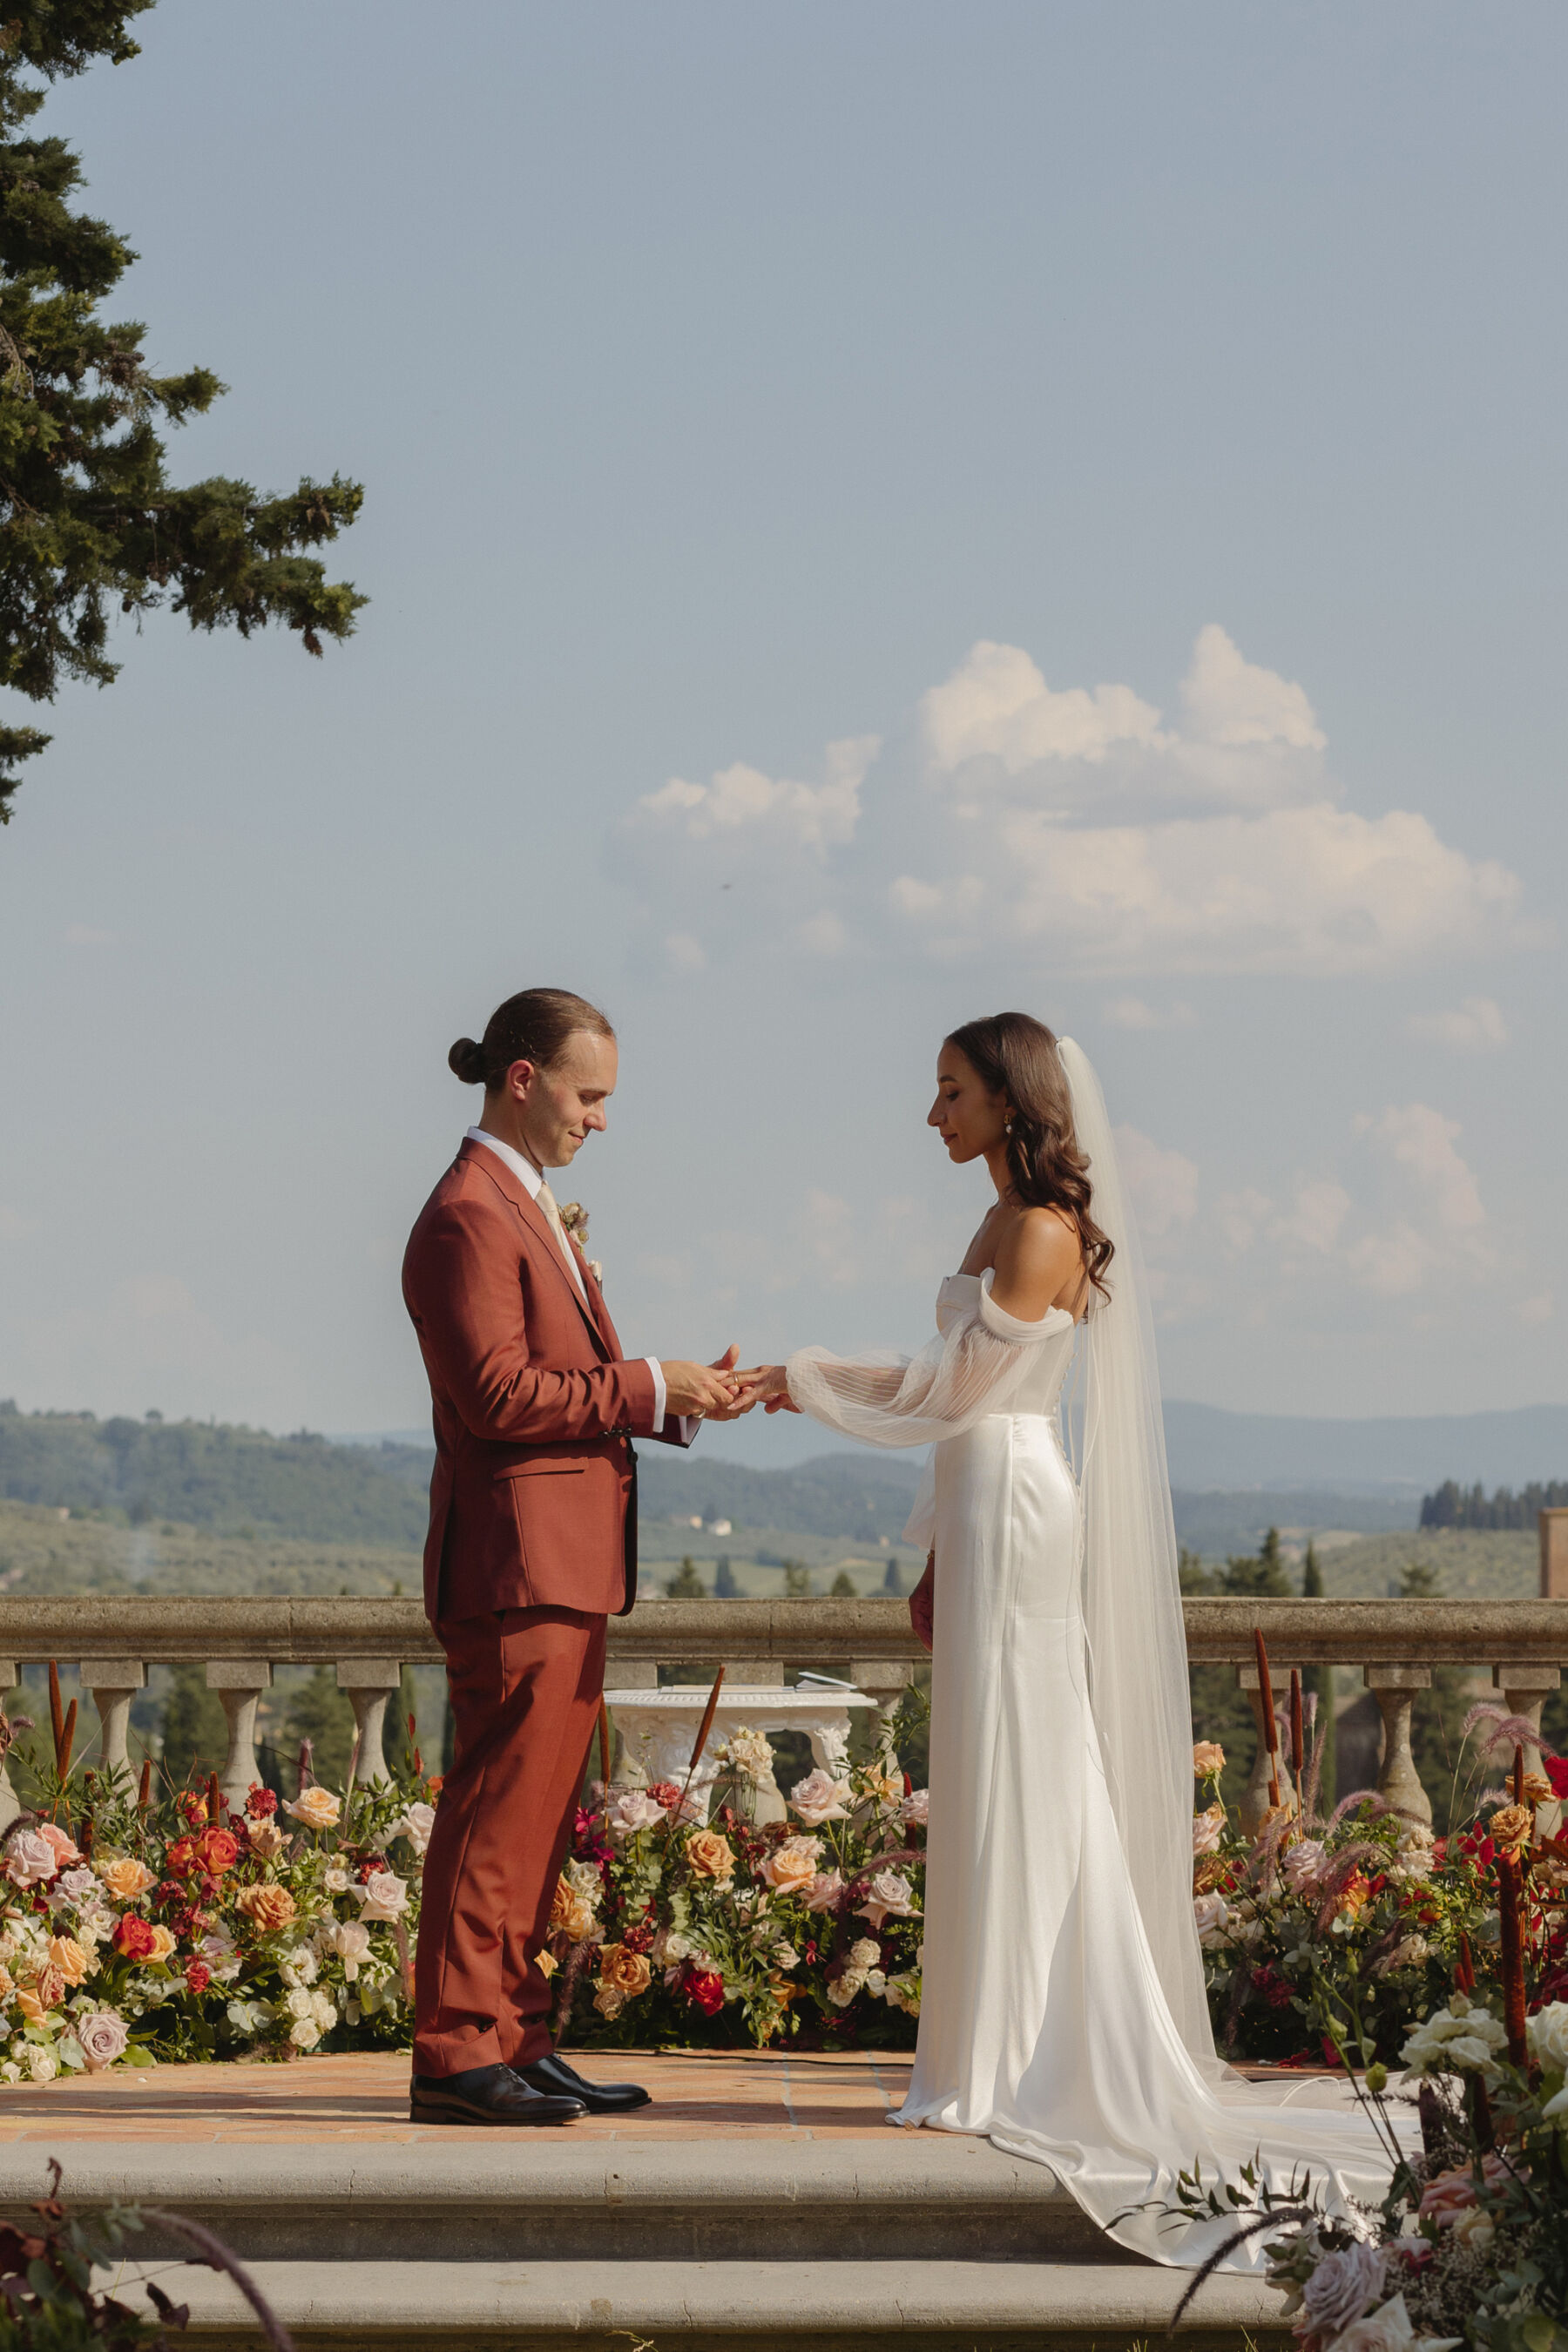 Bride and groom holding hands during their outdoor wedding ceremony in Tuscany, Italy - rolling hills visible in the background. The bride wears an Alena Leena wedding dress & the groom wears a burnt orange Paul Smith suit. The bride carries a colourful and elegant bouquet at waist level.